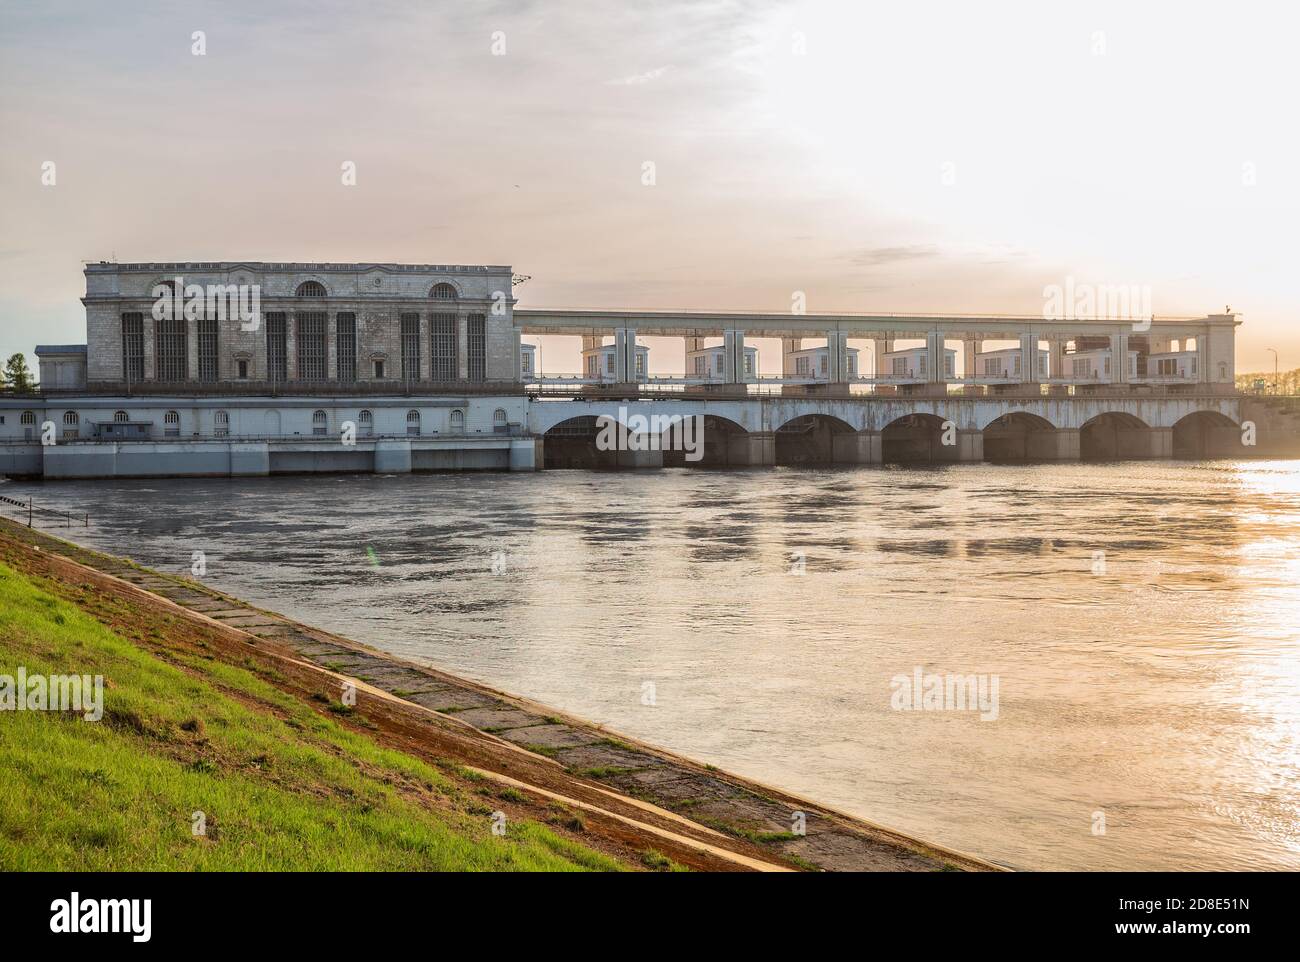 Uglich Hydroelectric Power Station on the Volga river, Russia Stock Photo